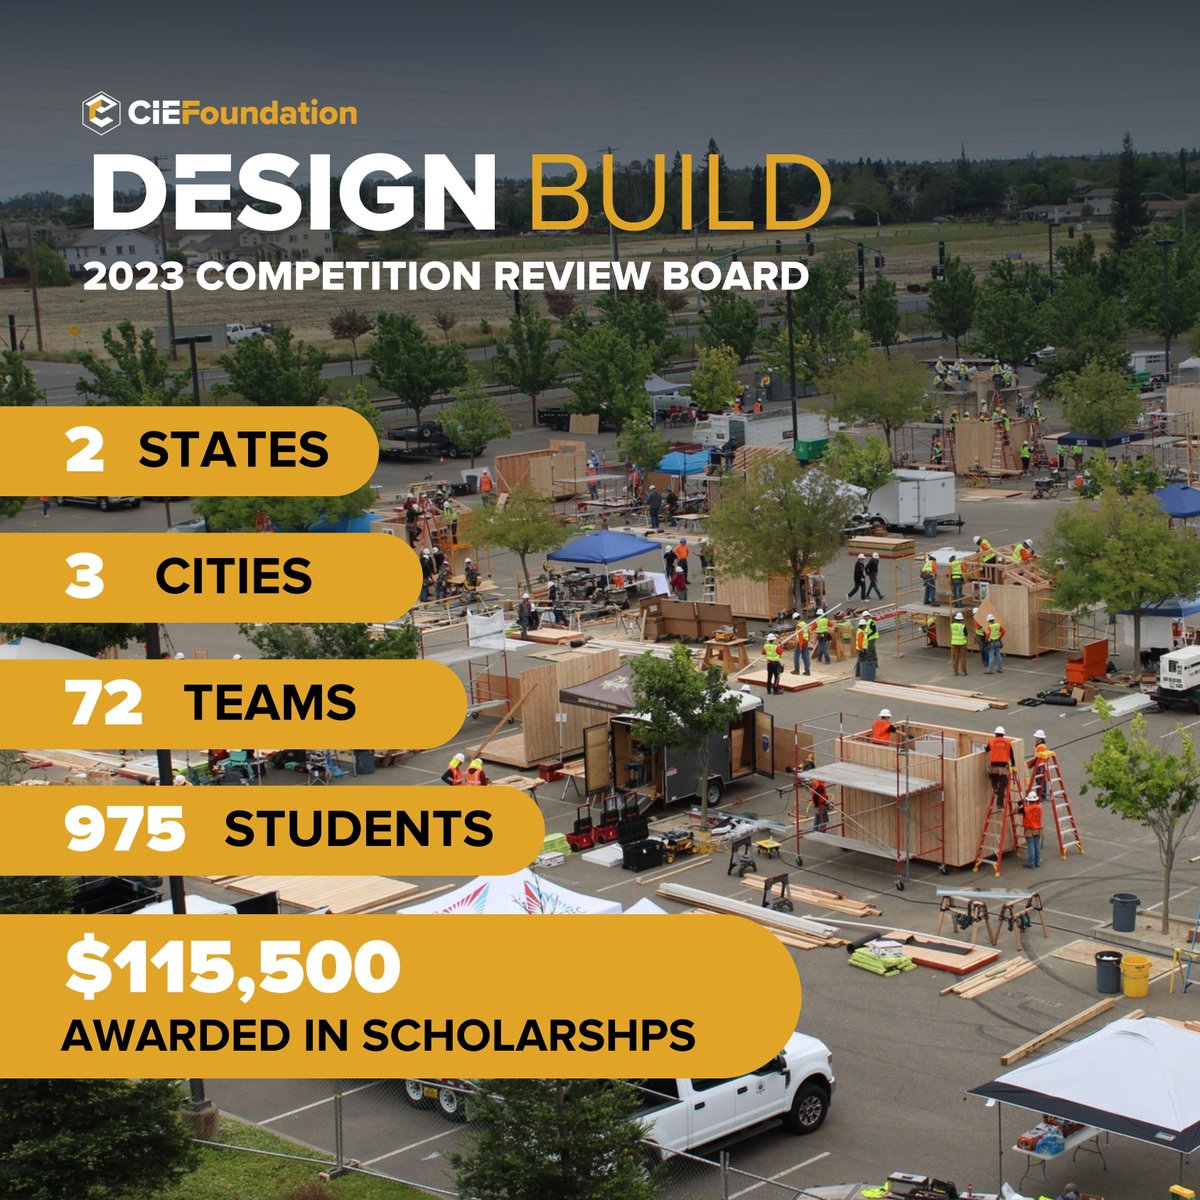 2 States. 3 Cities. 72 Teams. 975 Students.
Over $115,500 in Scholarships Awarded! 

From the shores of Huntington Beach to the vibrant Sacramento, CA, and the bustling Allen, TX, the 2023 Design Build Competition season was a whirlwind of creativity. designbuildcompetition.com